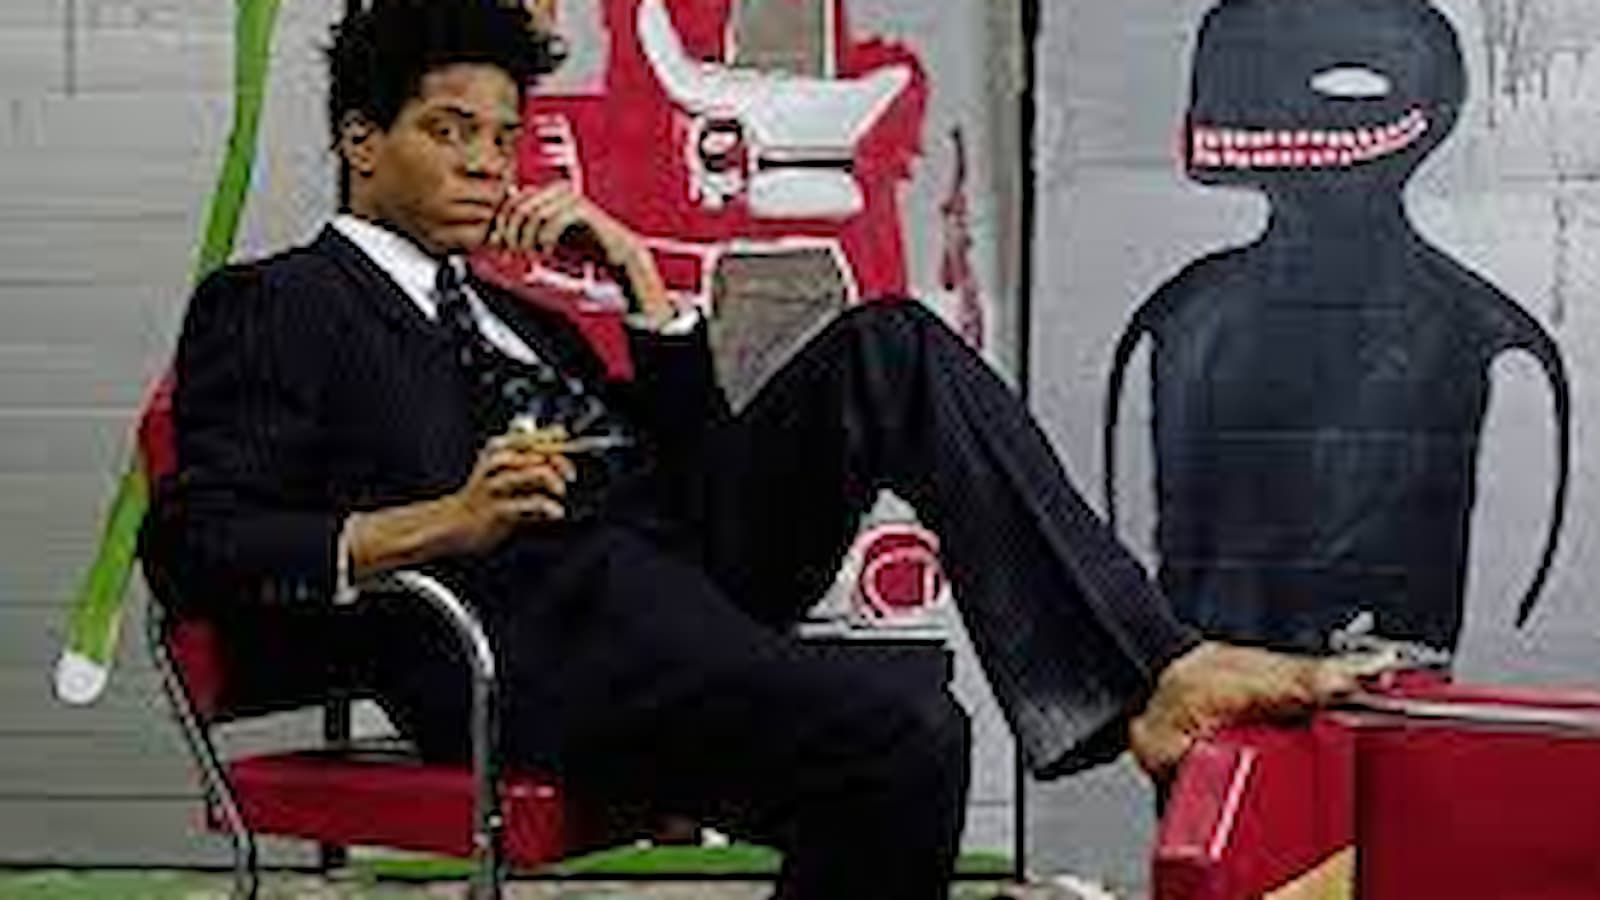 Jean-Michel Basquiat Biography: Age, Height, Birthday, Career, Family, Personal Life, Net Worth